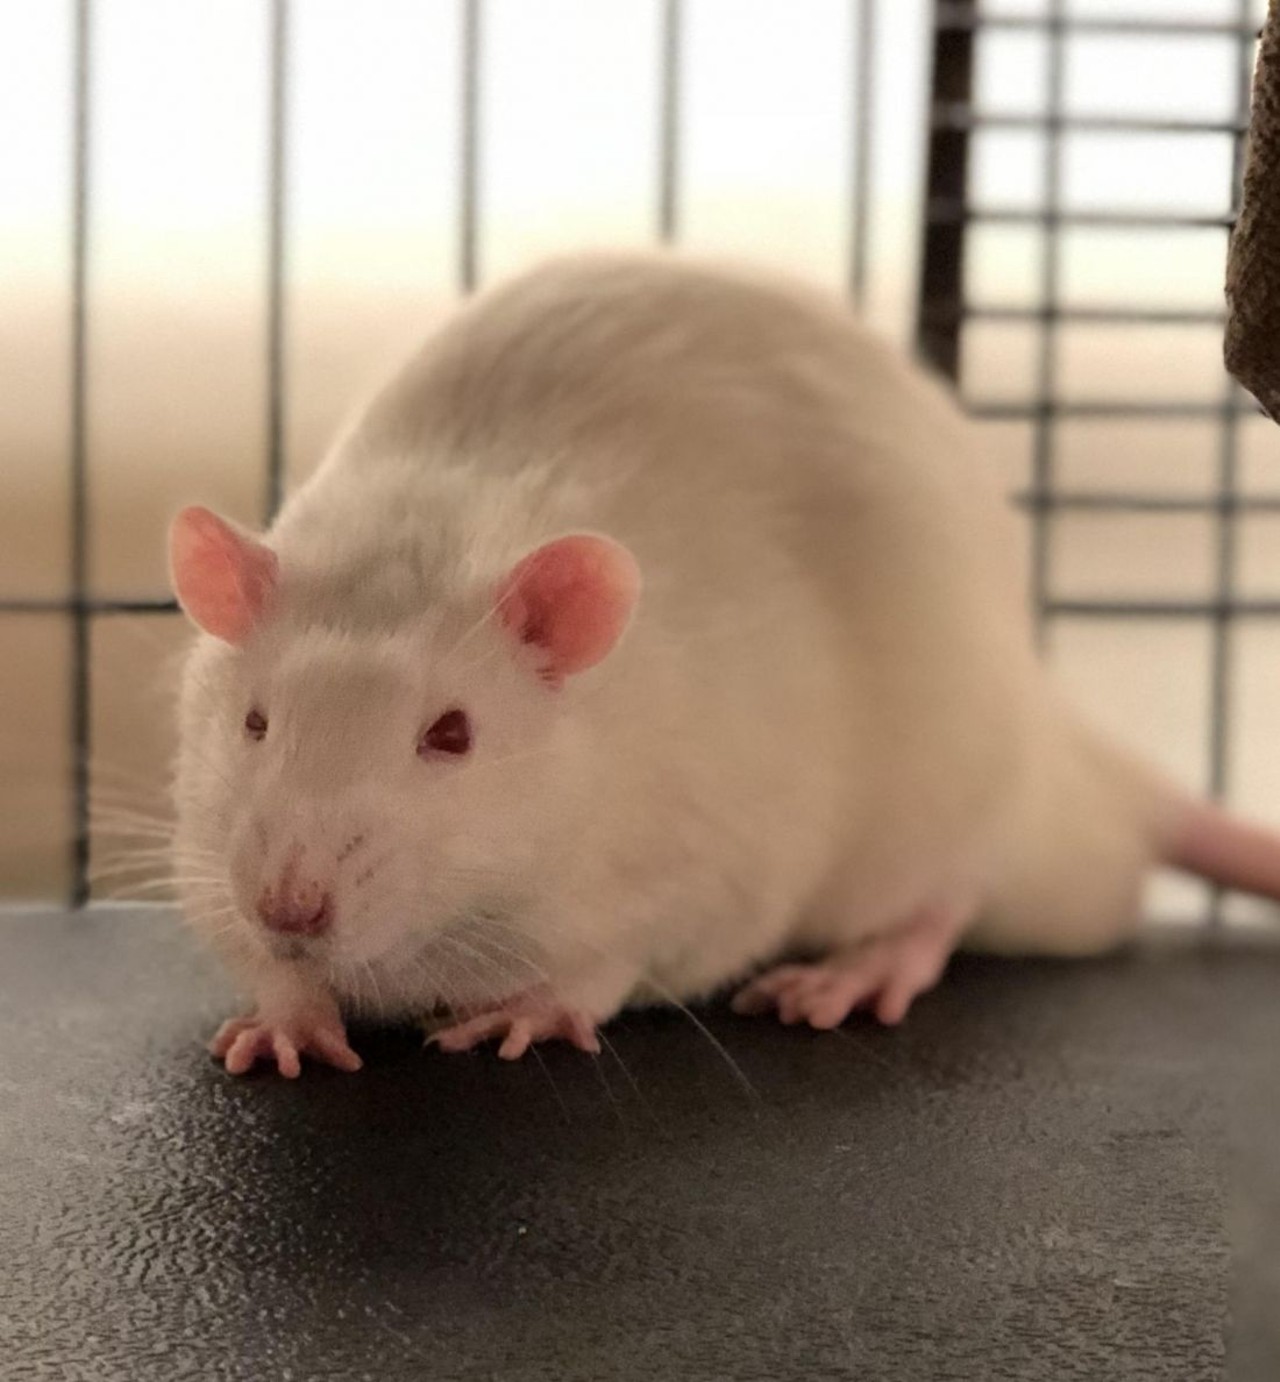 NAME: Pompidou
GENDER: Male
BREED: Purebred Rat
AGE: 9 months
SPECIAL CONSIDERATIONS: Experienced rodent owner preferred
REASON I CAME TO MHS: Homeless in Livonia
LOCATION: Berman Center for Animal Care in Westland
ID NUMBER: 867486